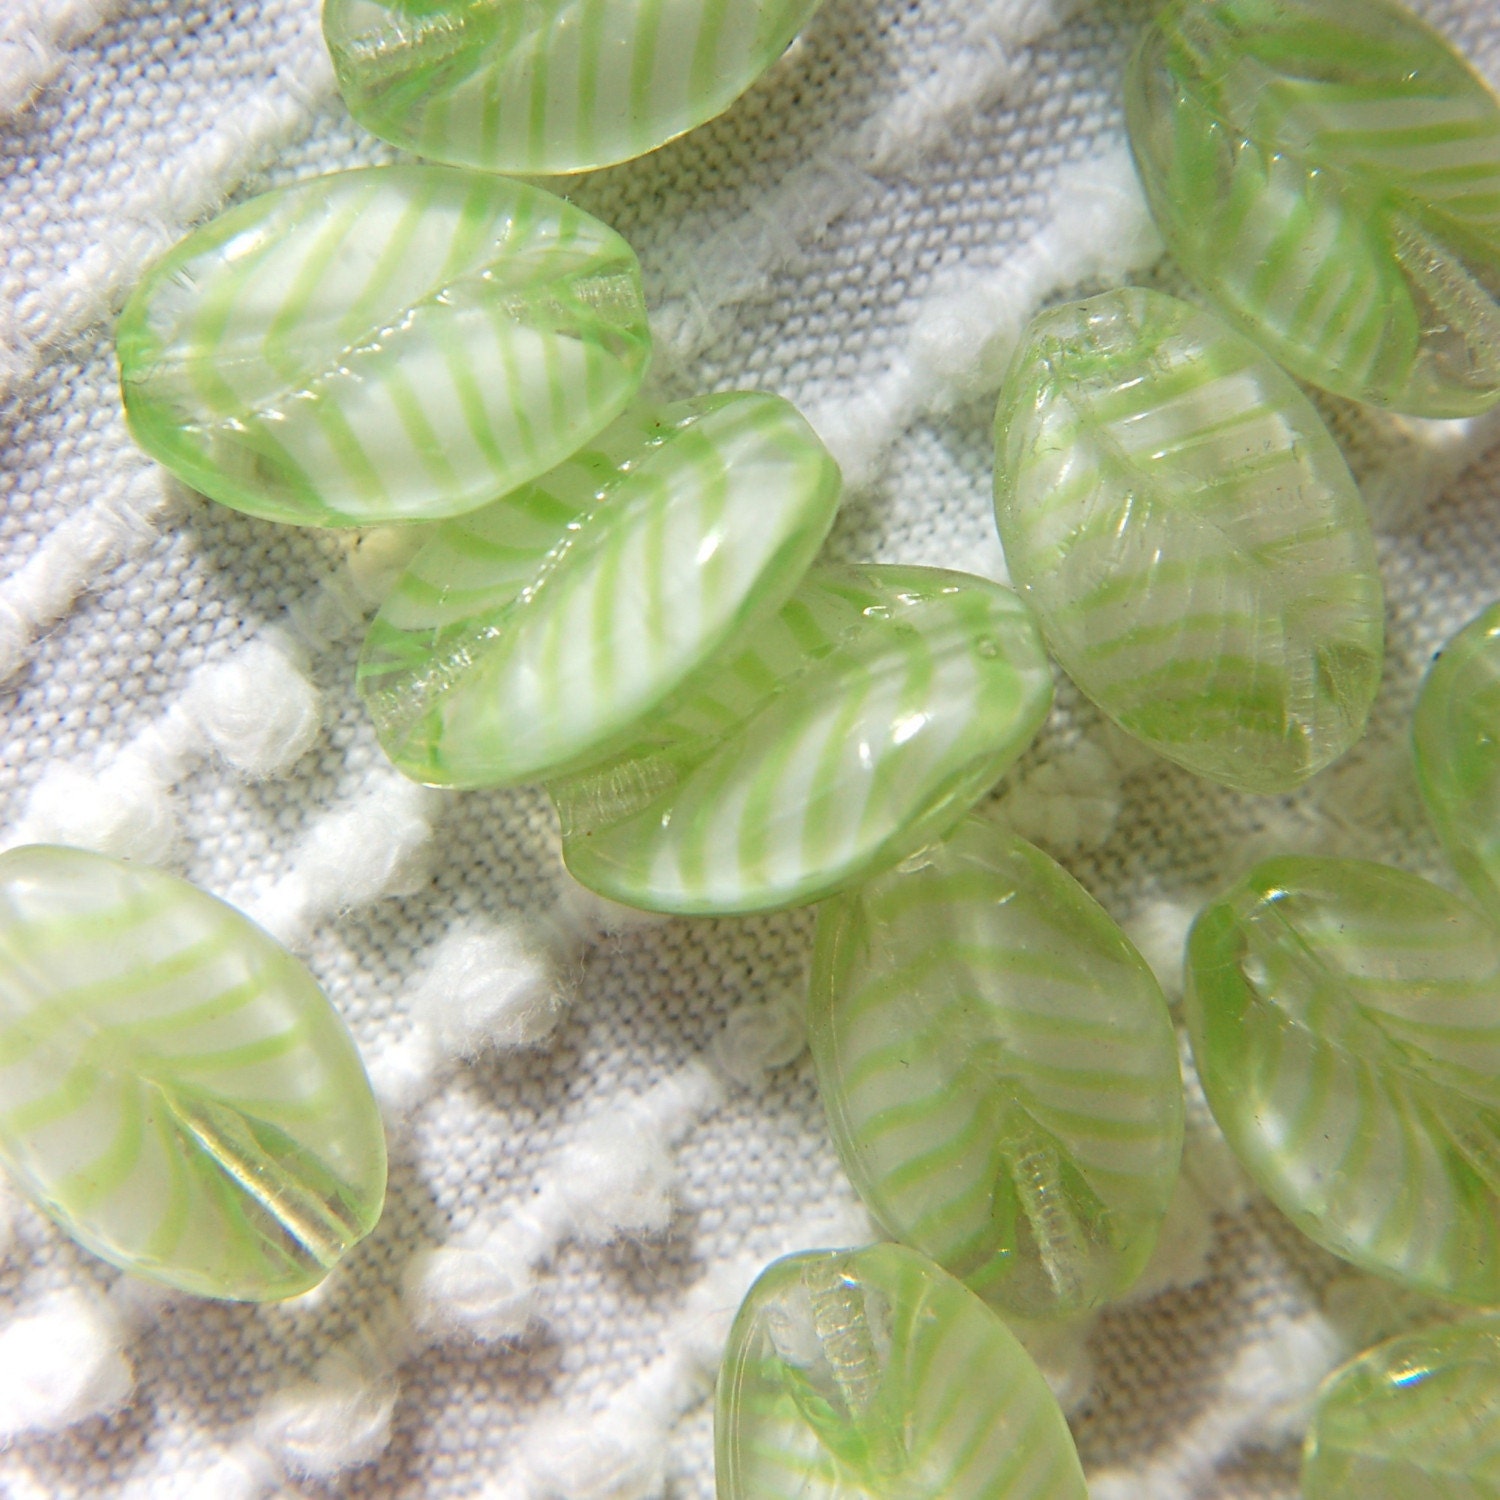 Vintage WG Givre Glass Leaf Beads in Pale Green and White - 17 PCs.